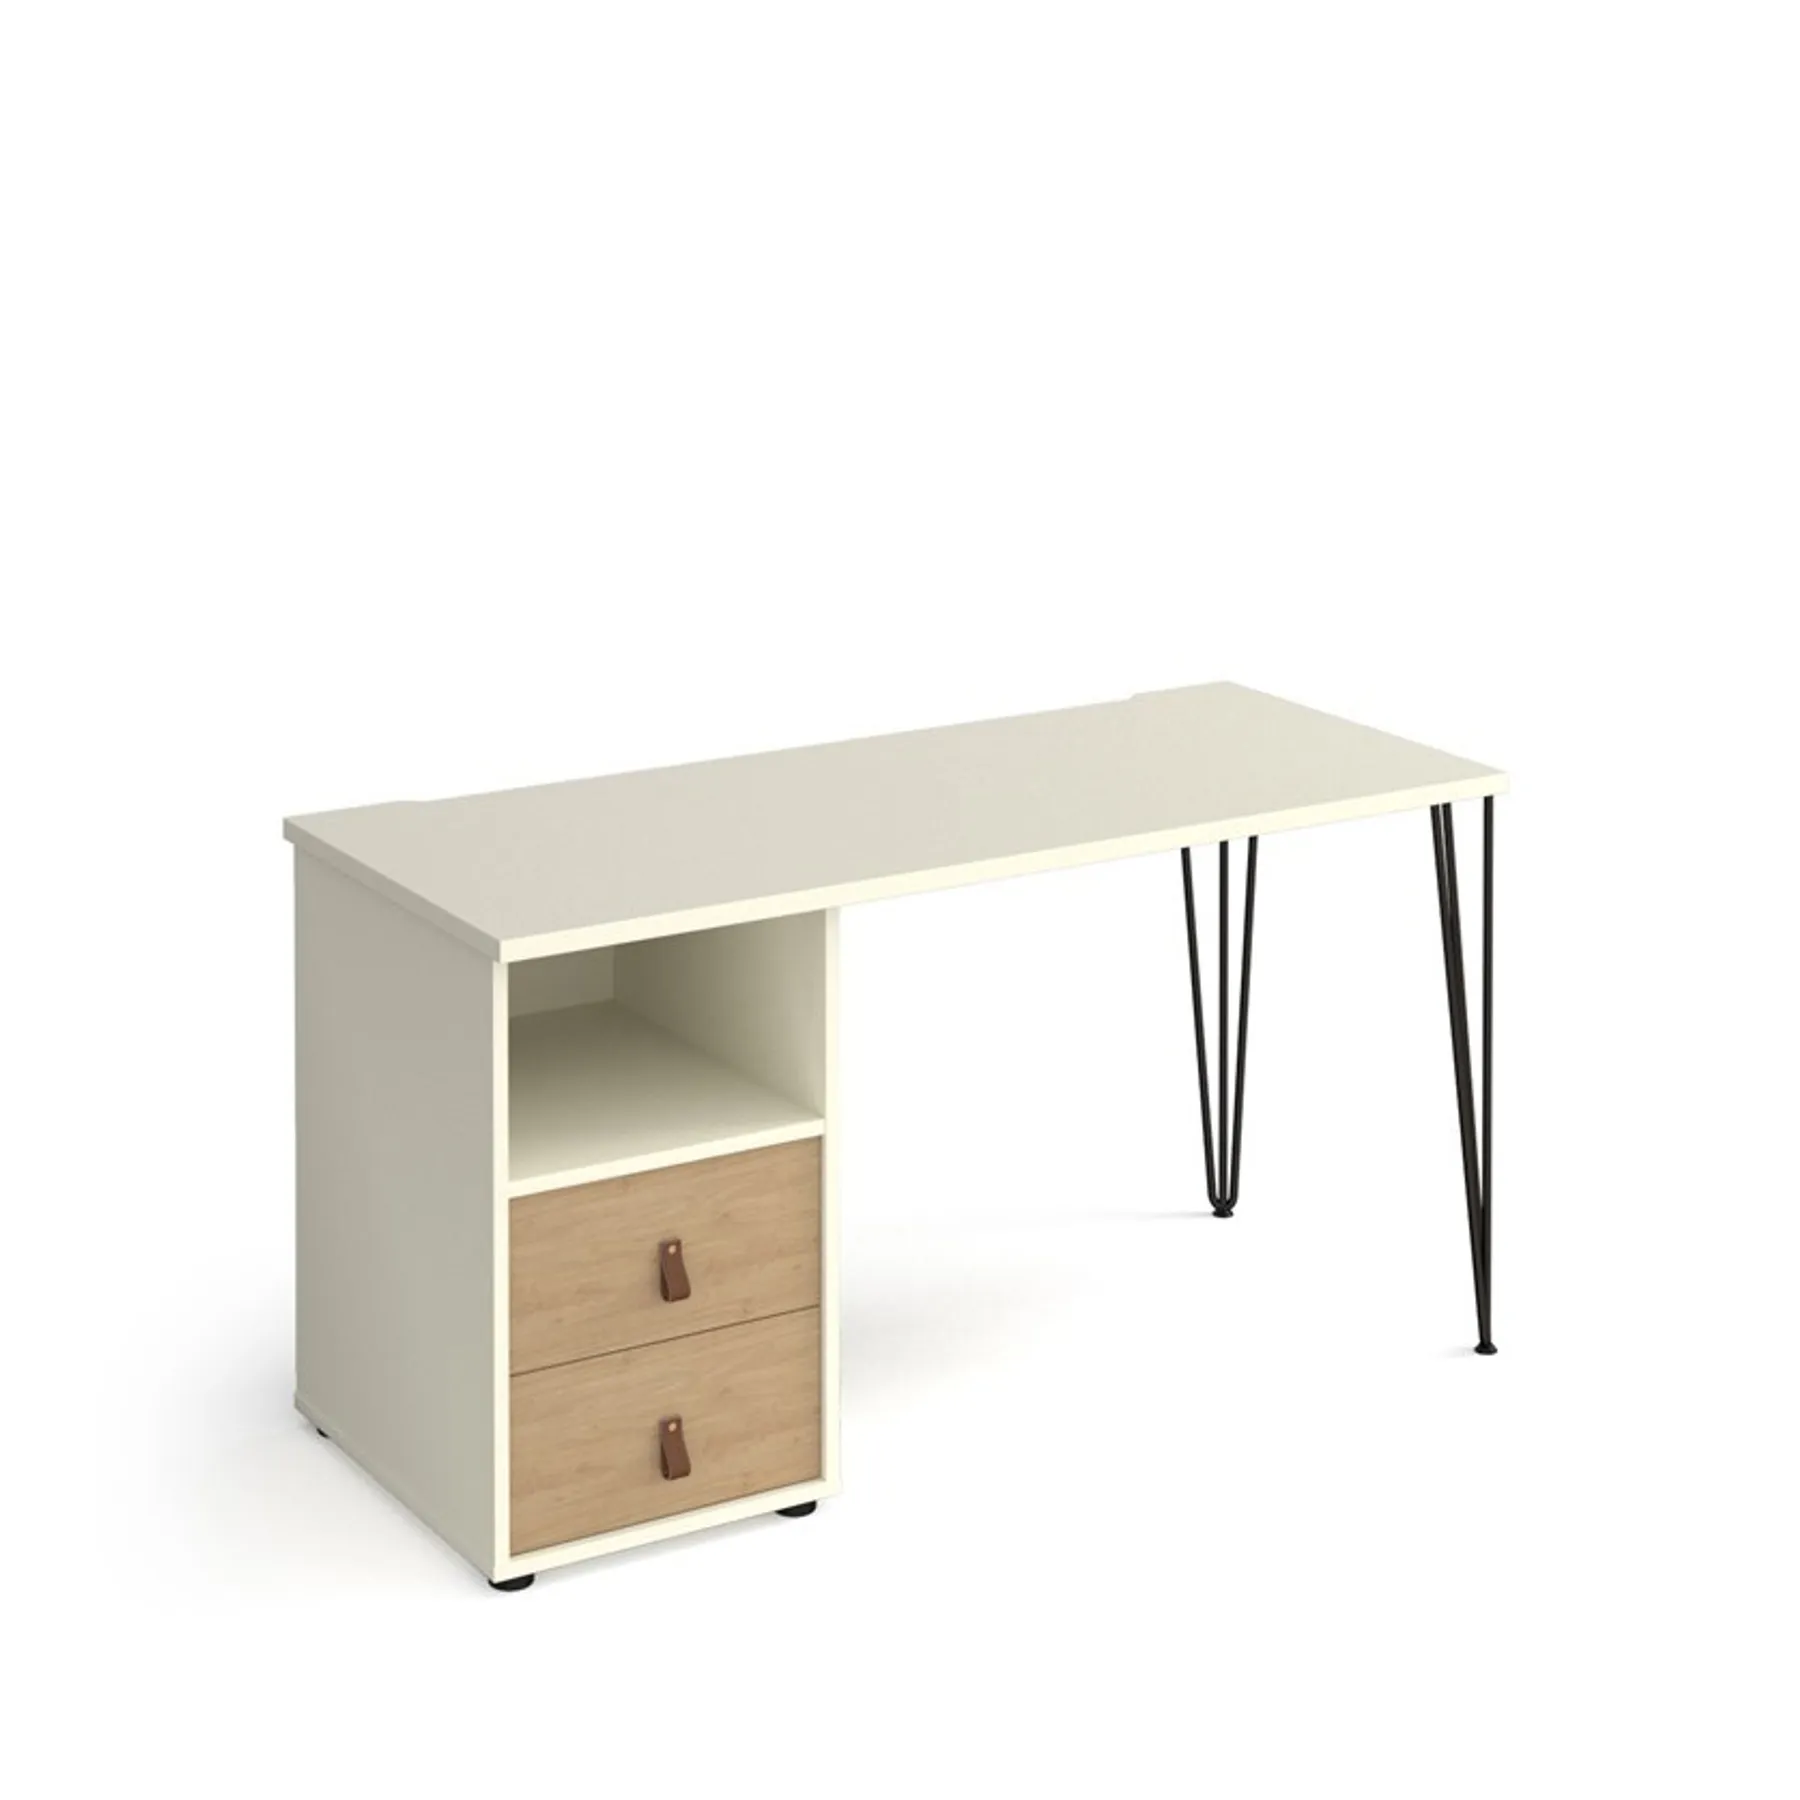 LOF Direct Dams Tikal Hairpin Home Office Desk with drawers White Oak TK614 P D